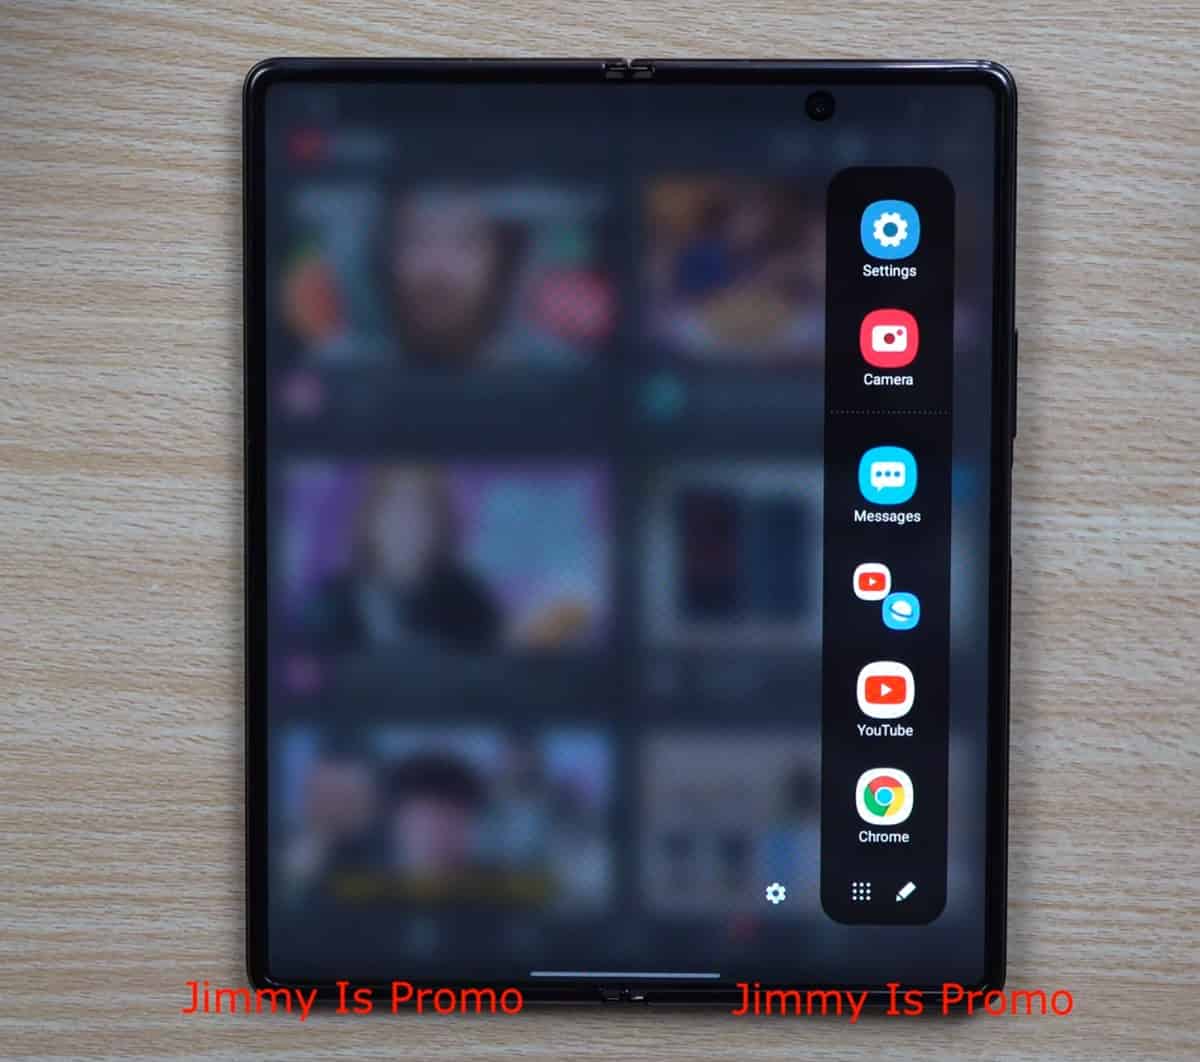 New Samsung Galaxy Z Fold 2 hands-on video demonstrates multi-tasking features